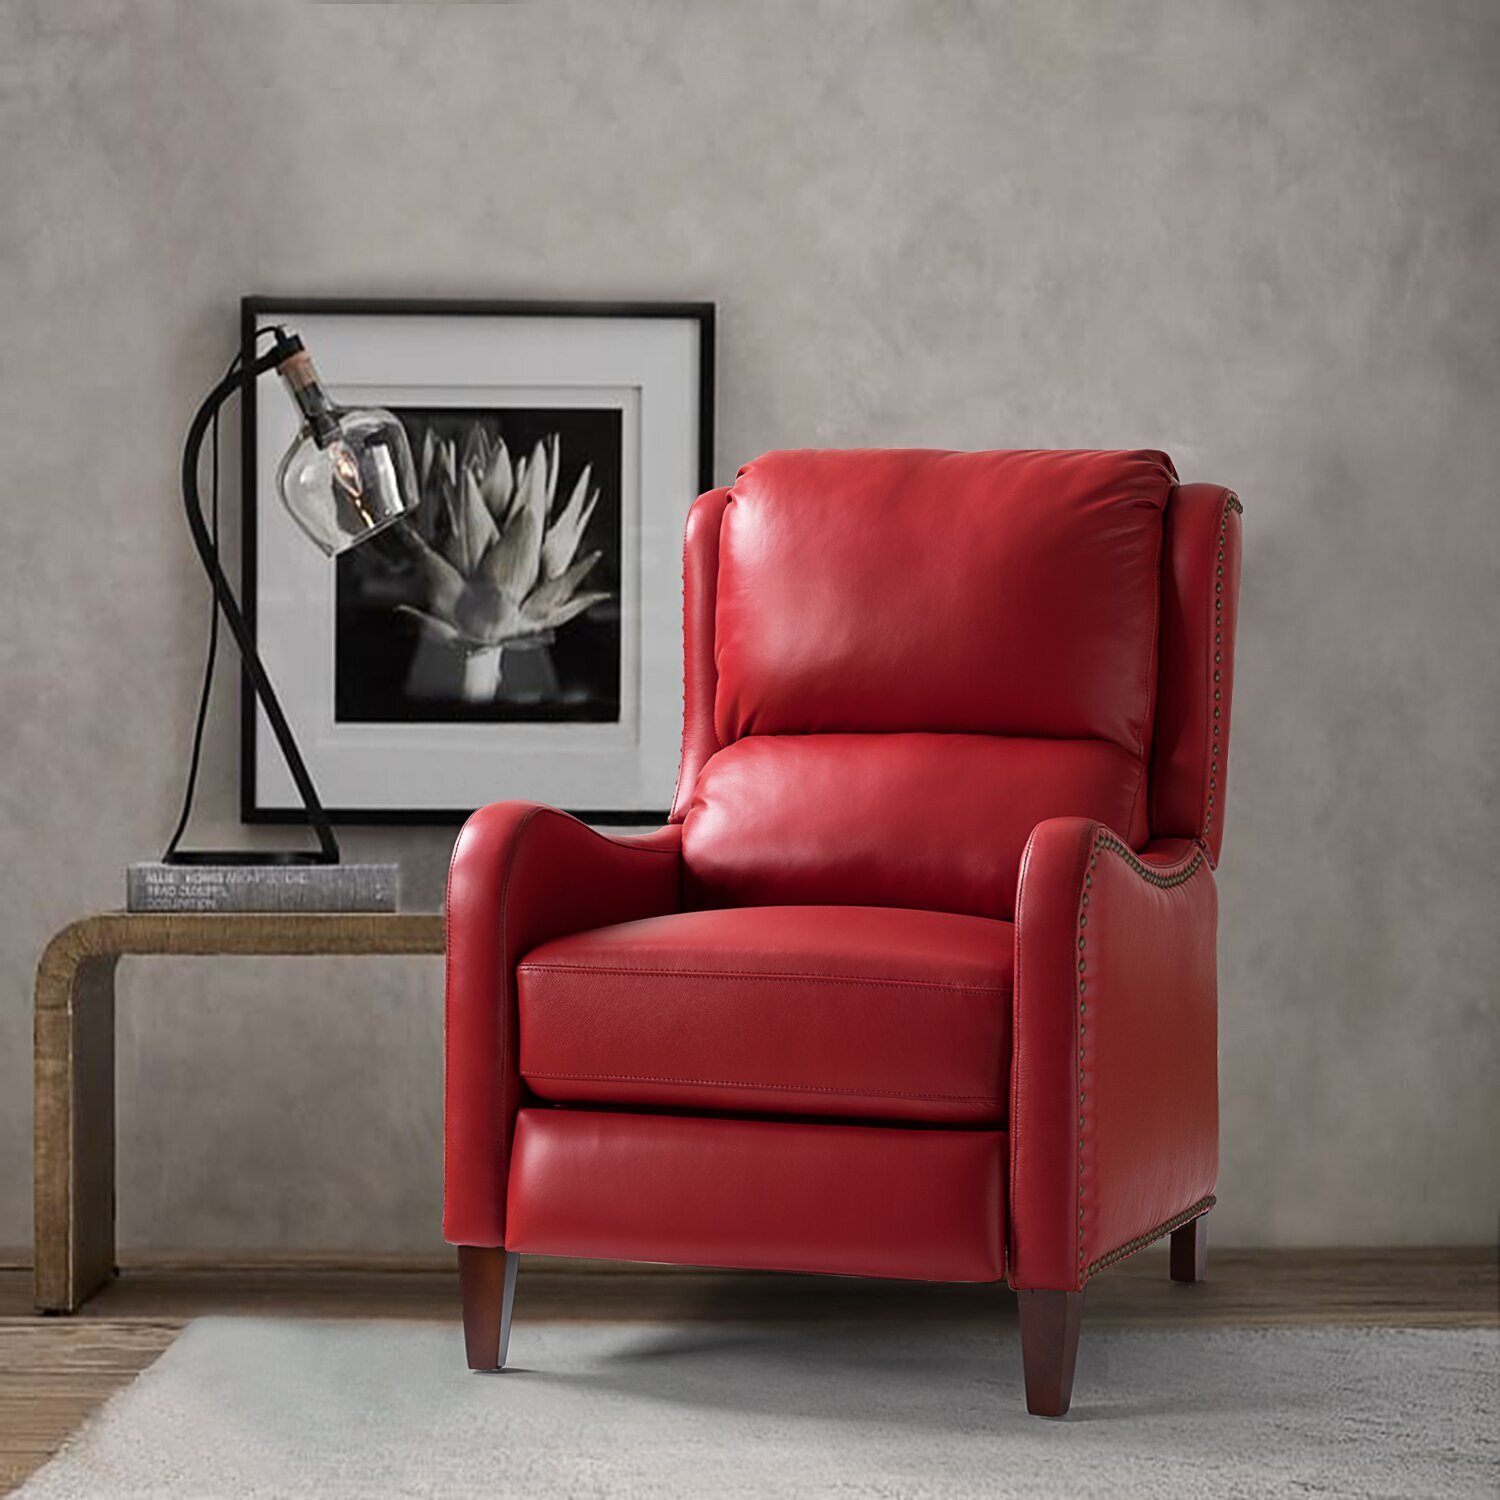 Club style Red Leather Recliner